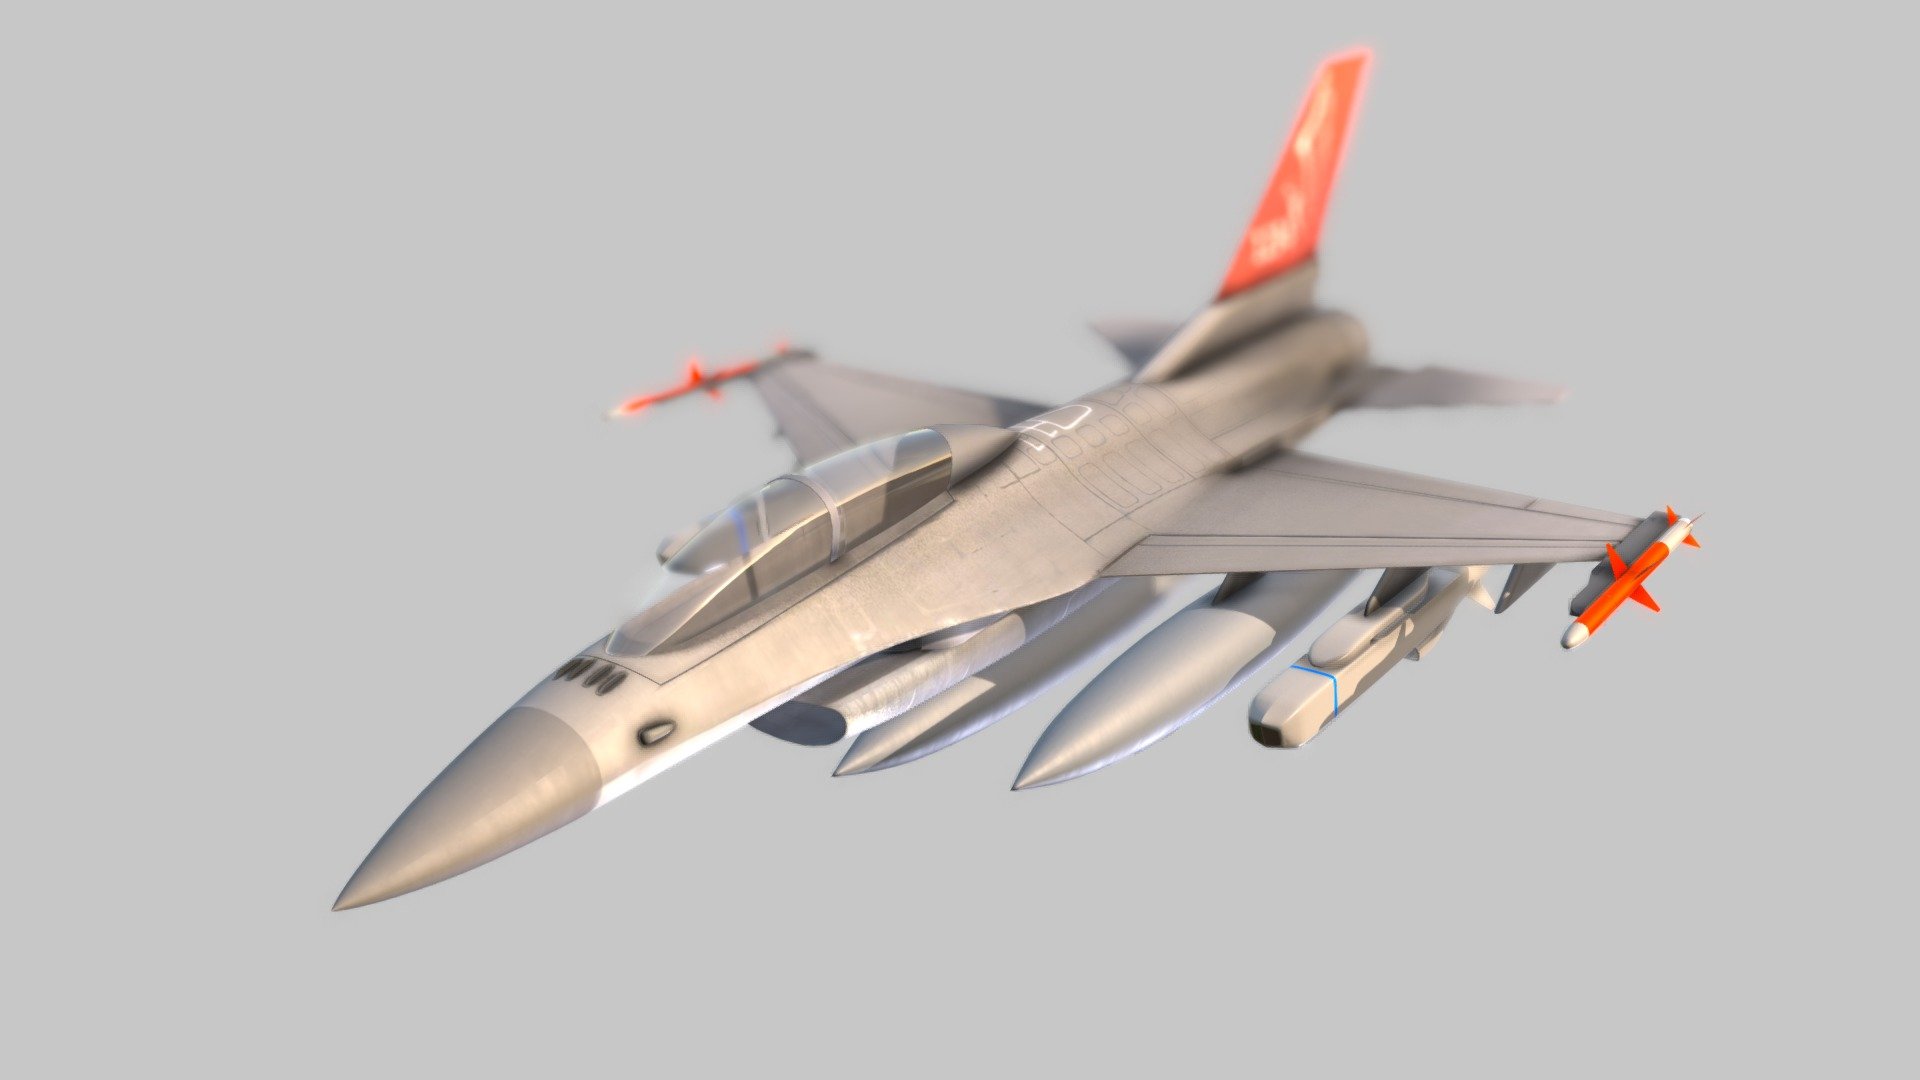 Highly detailed 3d model of F16 fighting falcon, SOM1 cruise missile and sparrow2 rocket modeled and textured using blender software.

Textured using 40964096 and one 81928192 maps 3d model